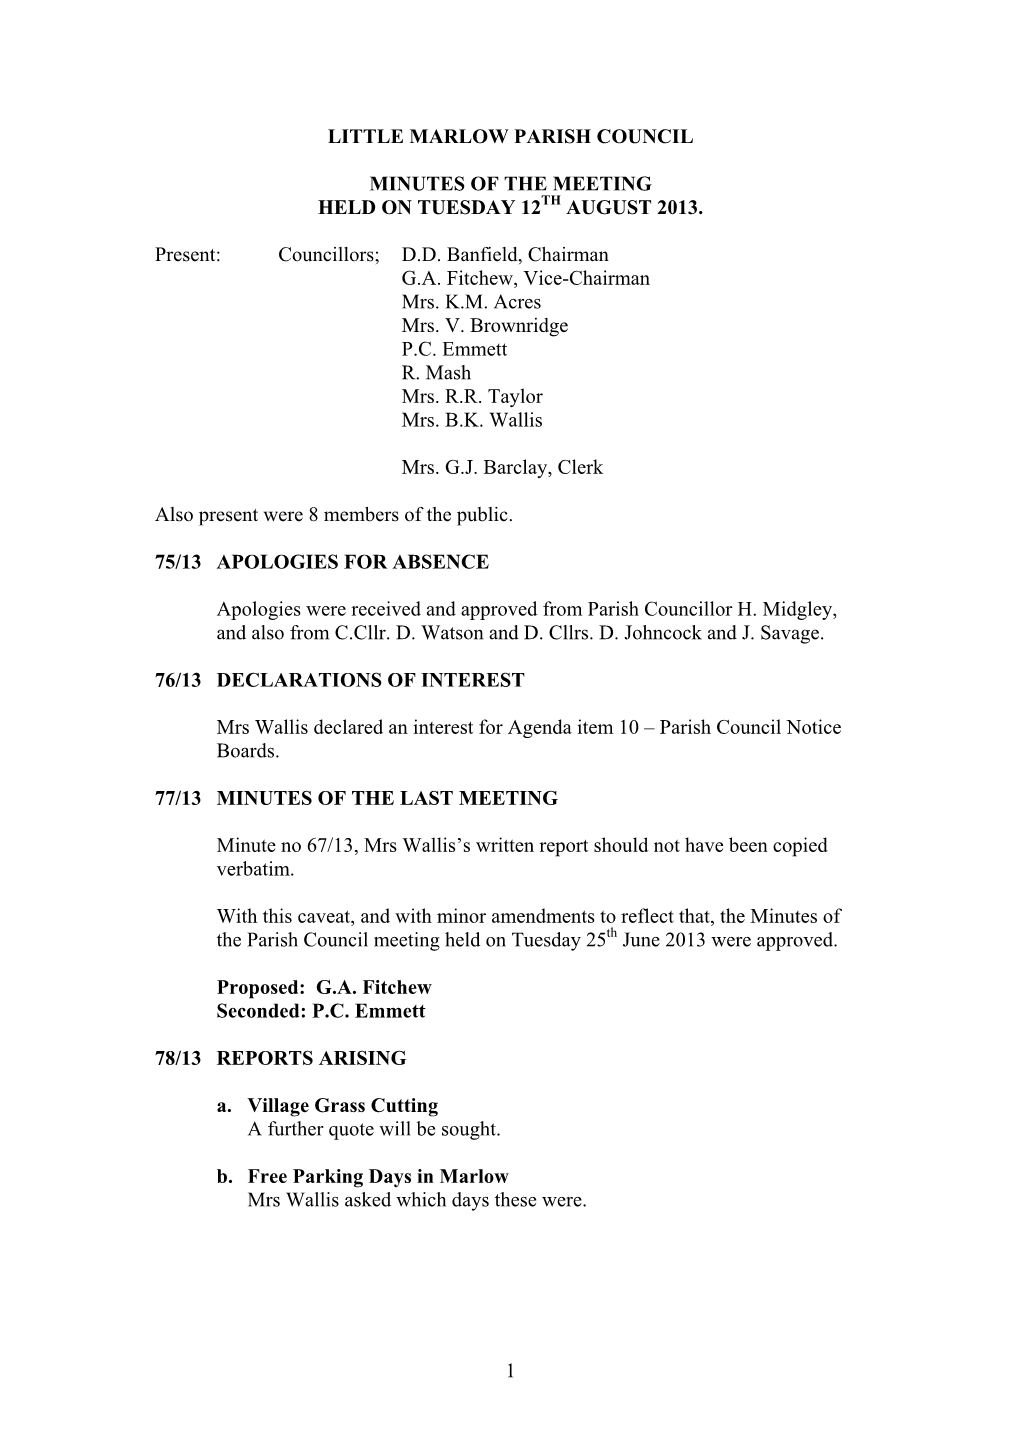 1 Little Marlow Parish Council Minutes of The